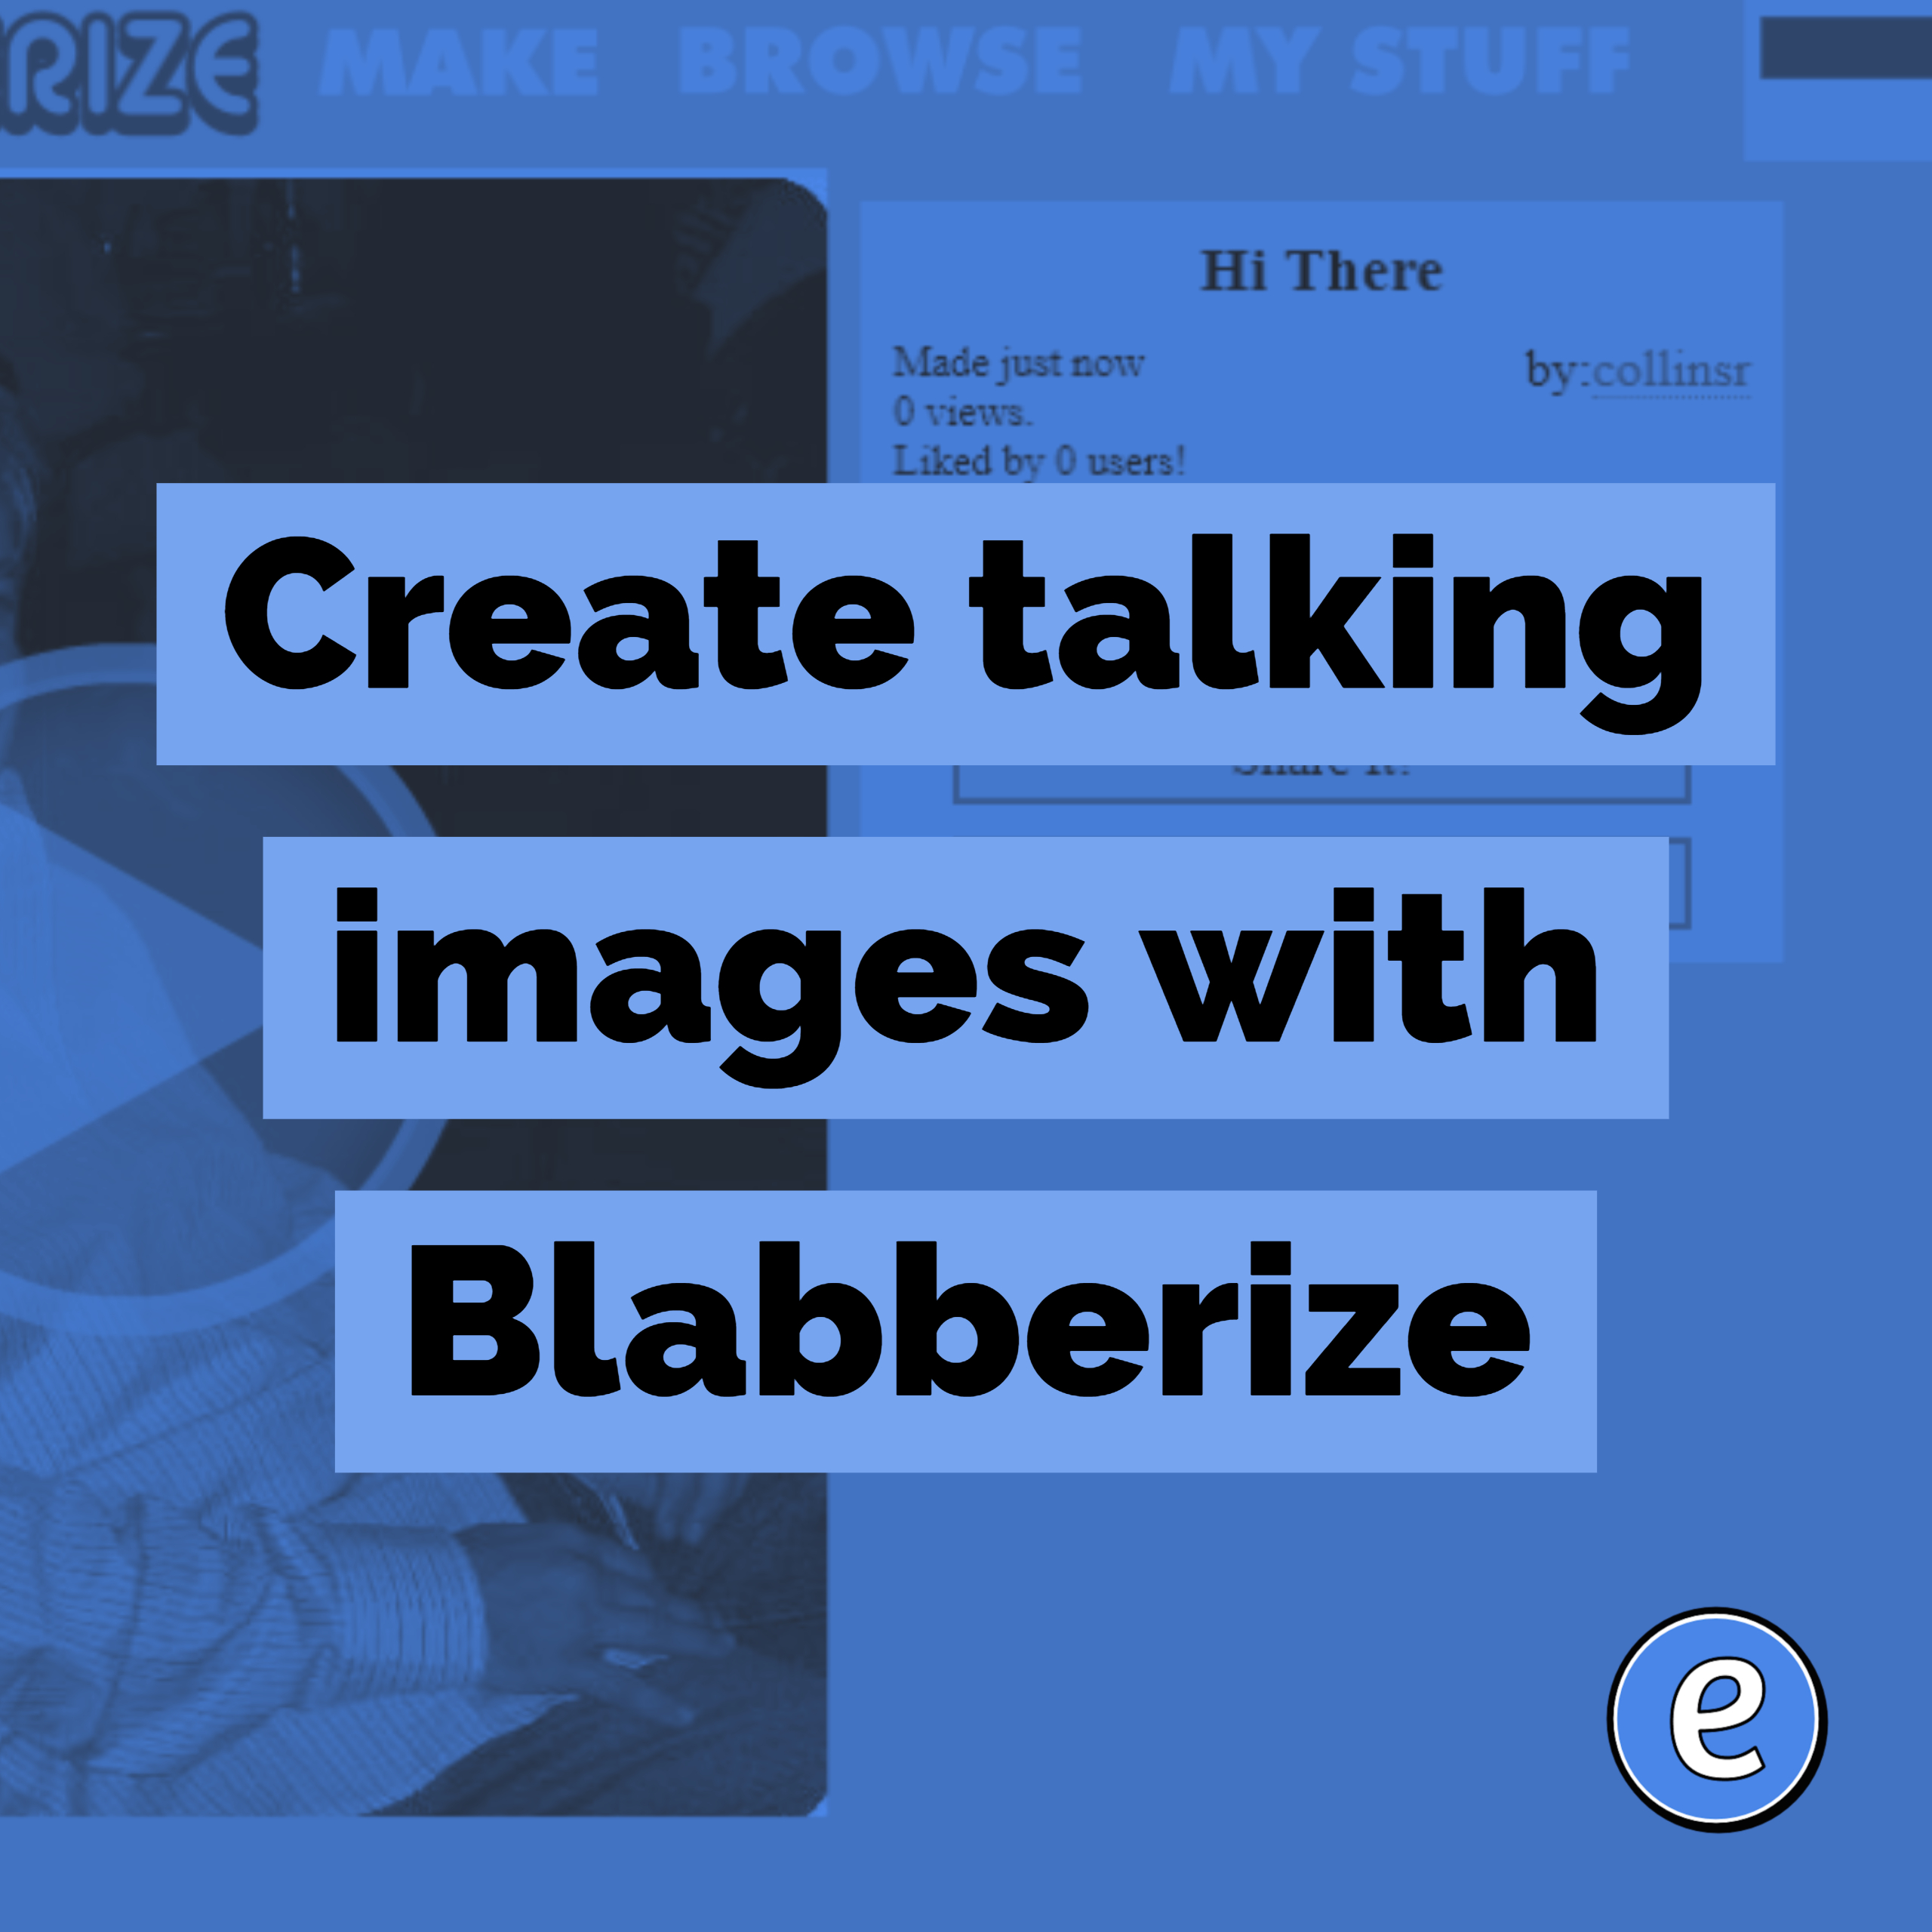 Create talking images with Blabberize